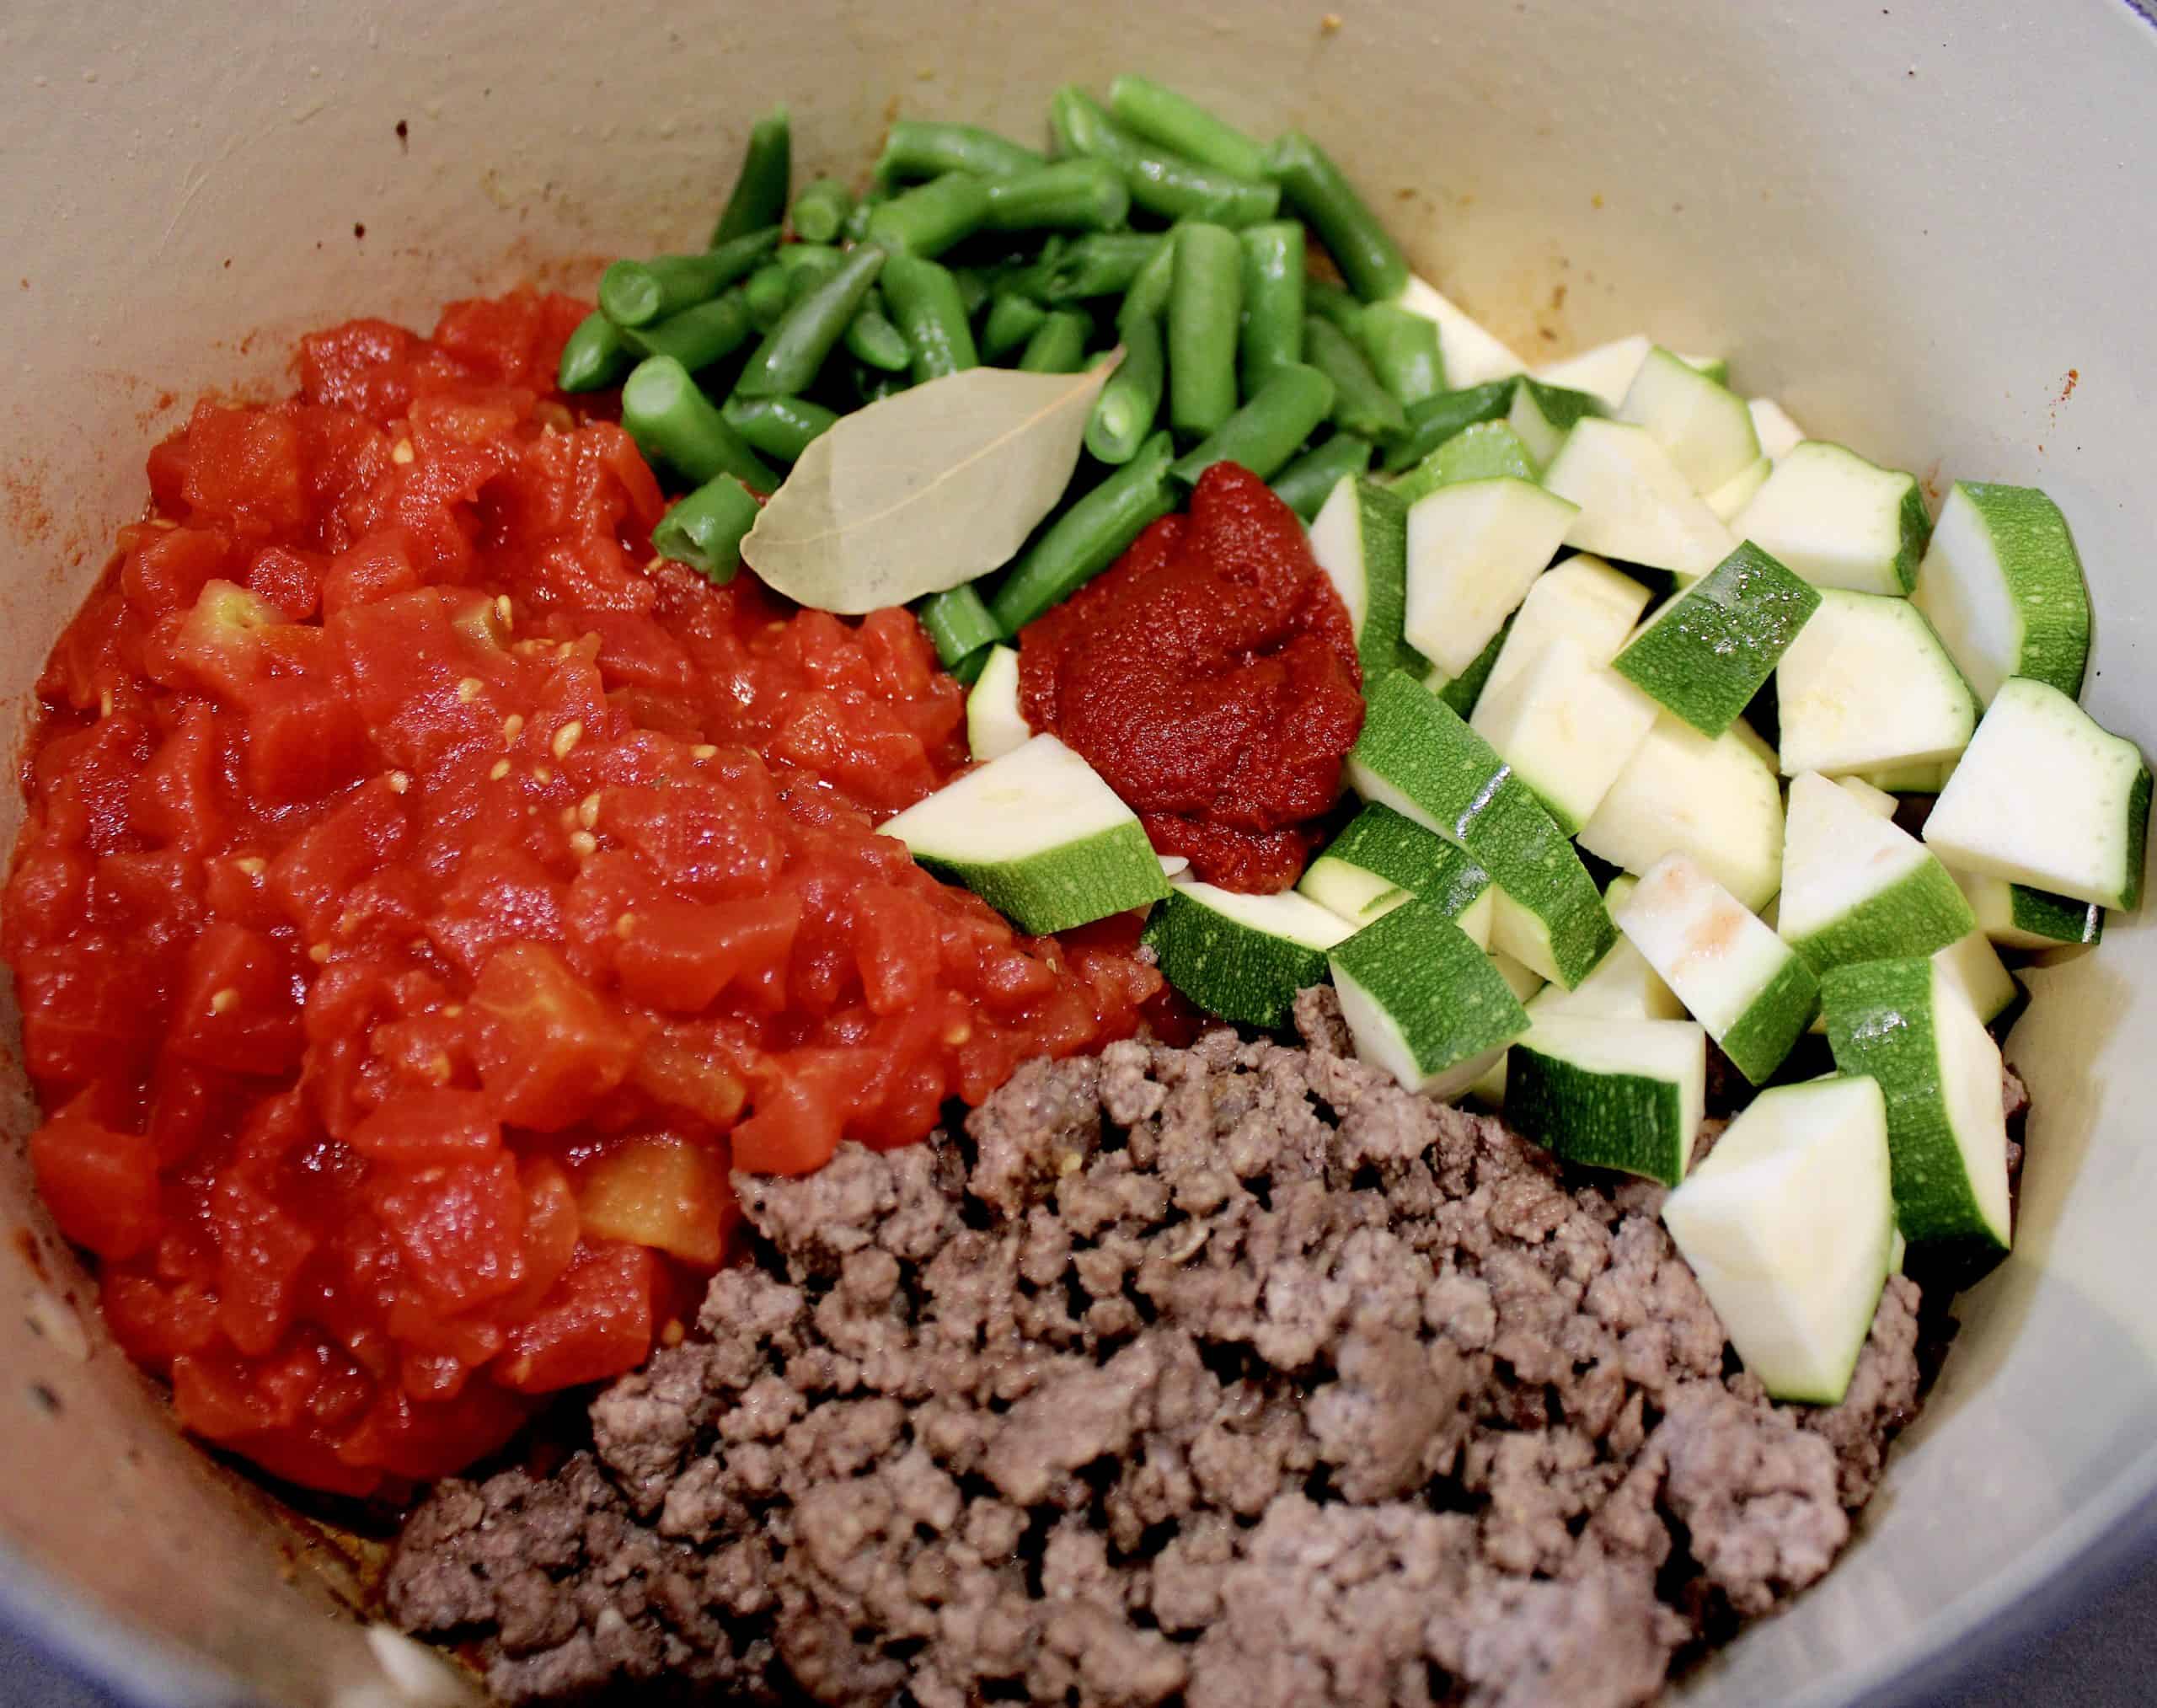 tomatoes chopped zucchini green beans and ground beef in pot uncooked